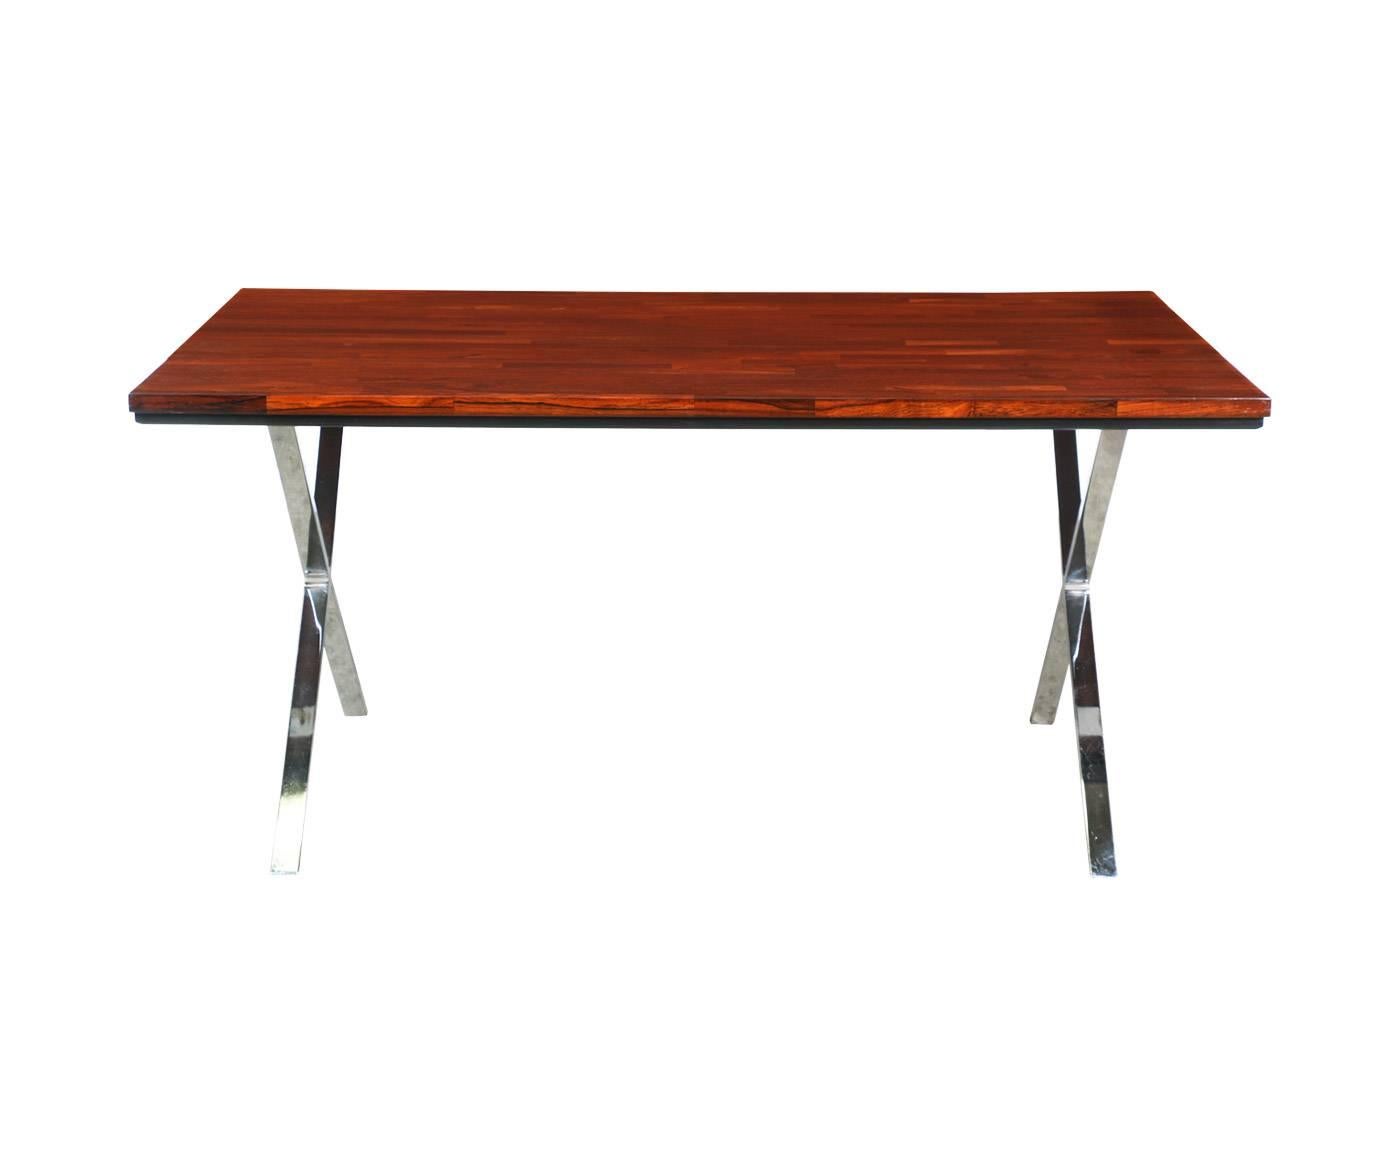 Designer: Unknown.
Manufacturer: Unknown.
Period/Style: Mid-Century Modern.
Country: United States.
Date: 1960s.

Dimensions: 28″ H x 60″ W x 36″ D.
Materials: Rosewood, chrome shows some minor wear.
Condition: Excellent – Newly